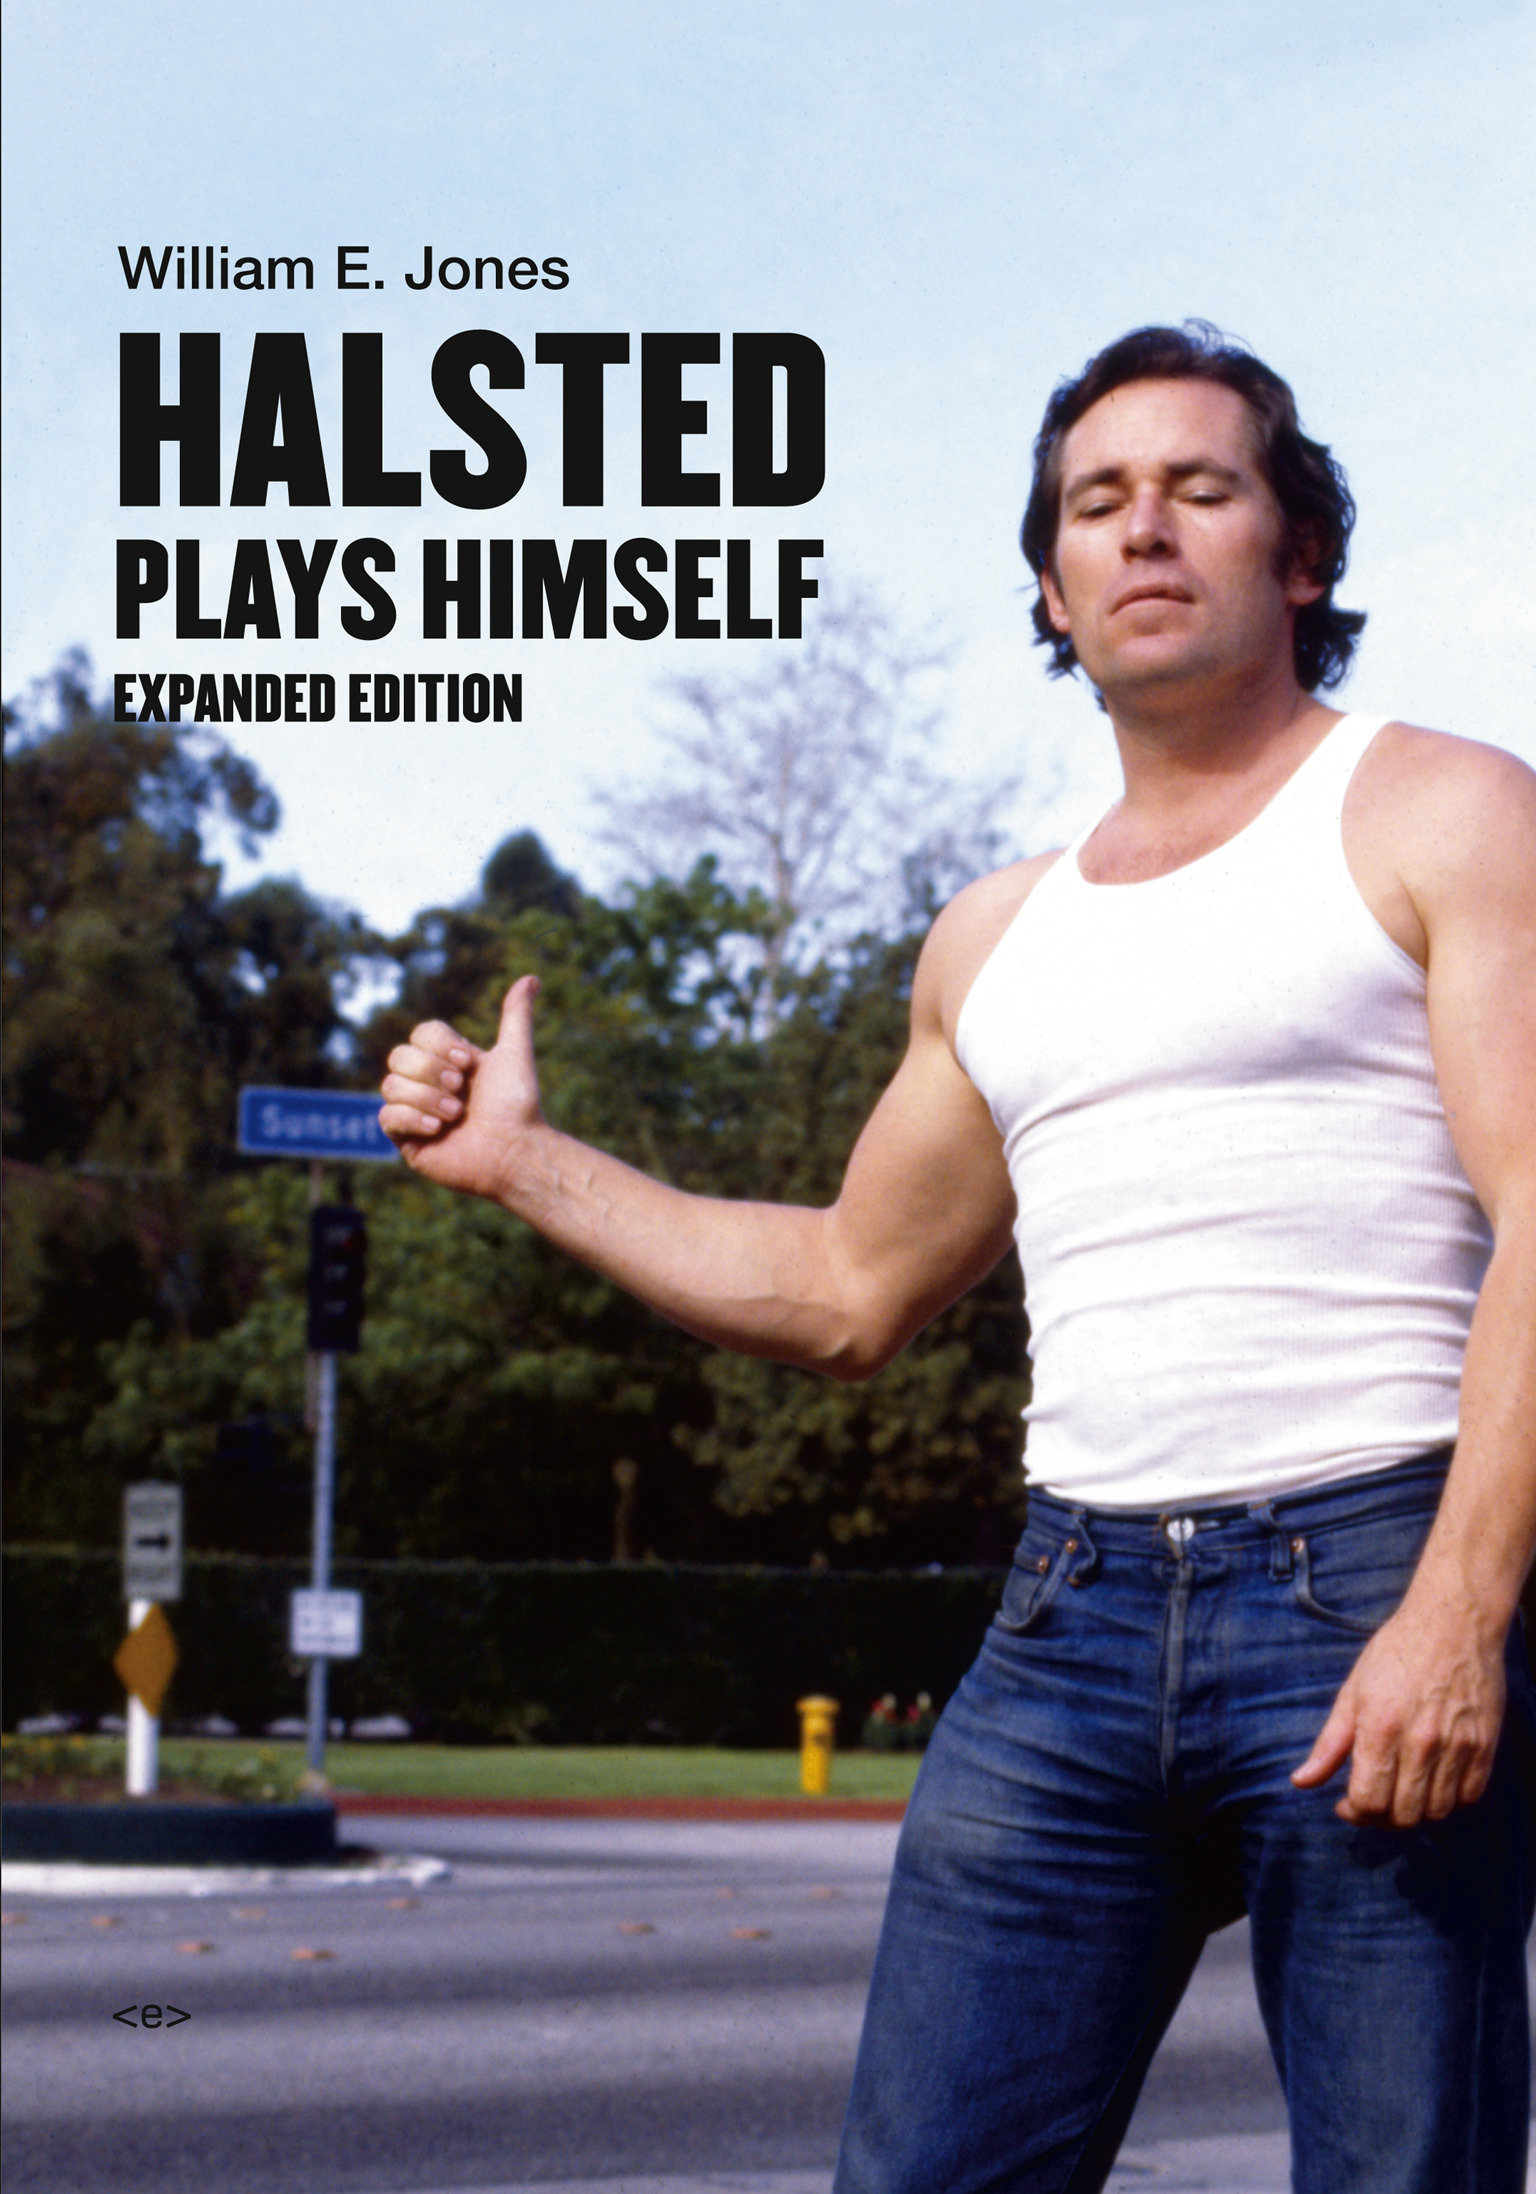 Halsted Plays Himself, Expanded Edition (Hardcover Book)